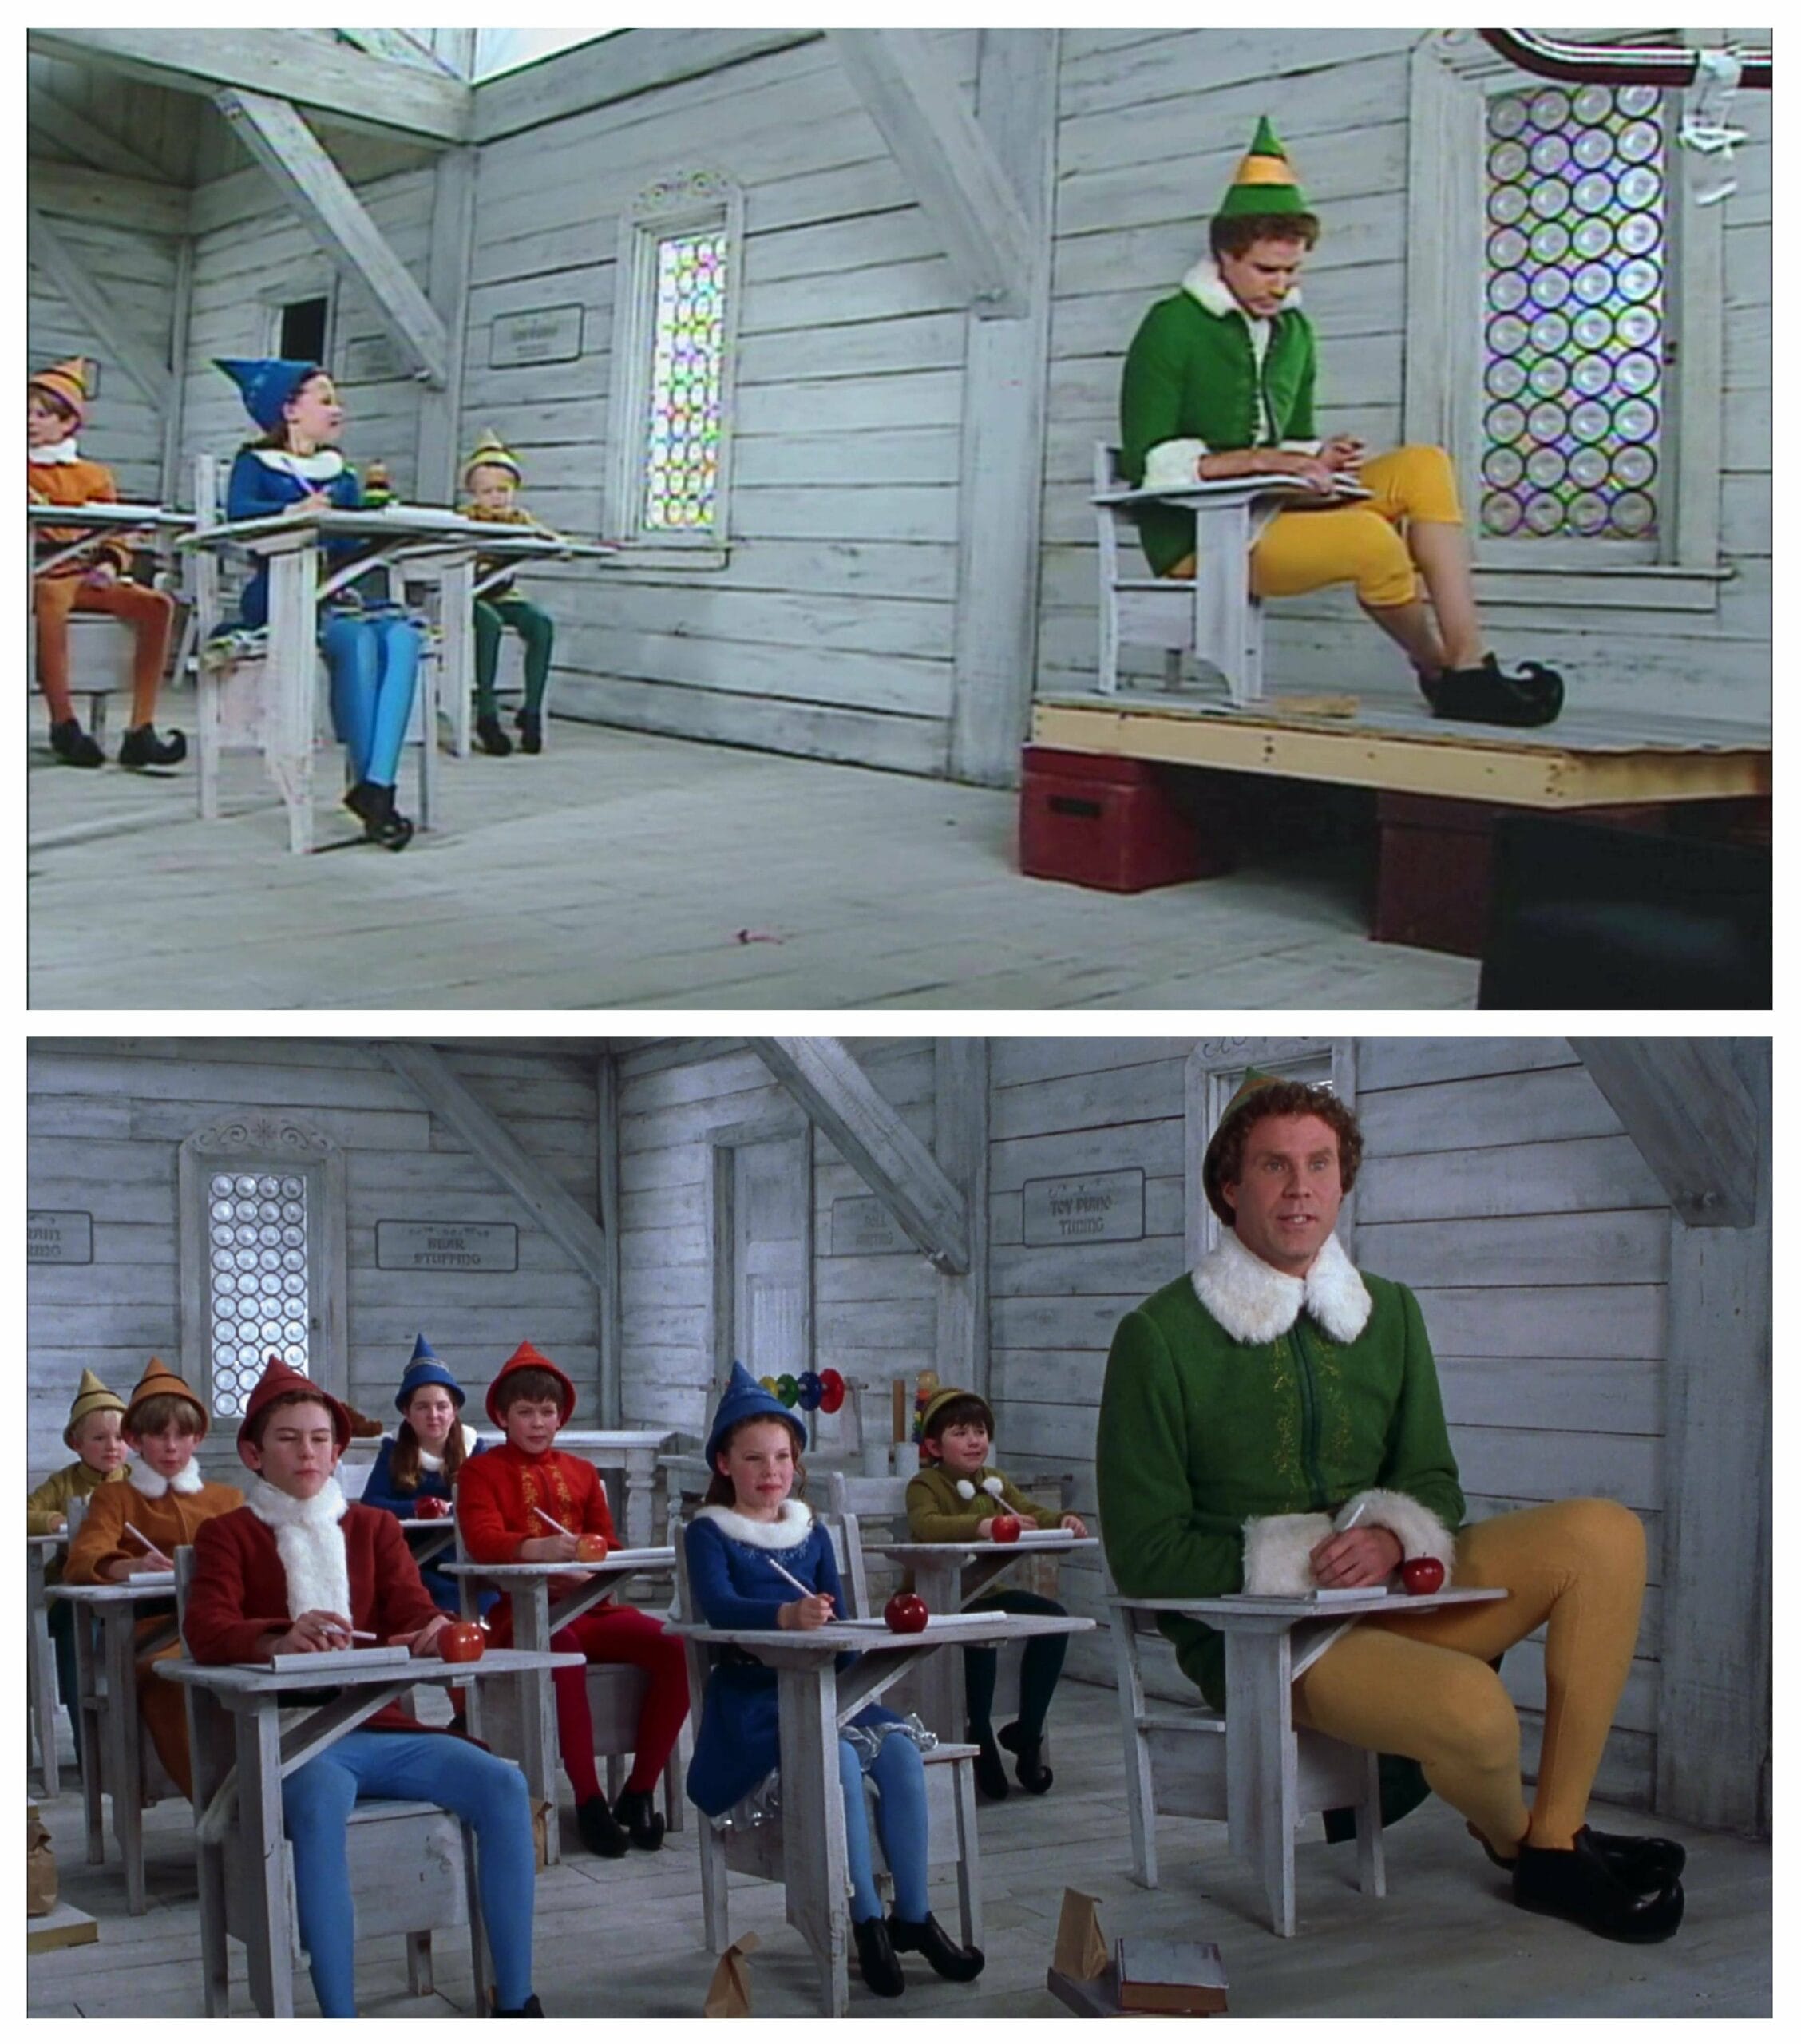 Elf: Forced Perspective